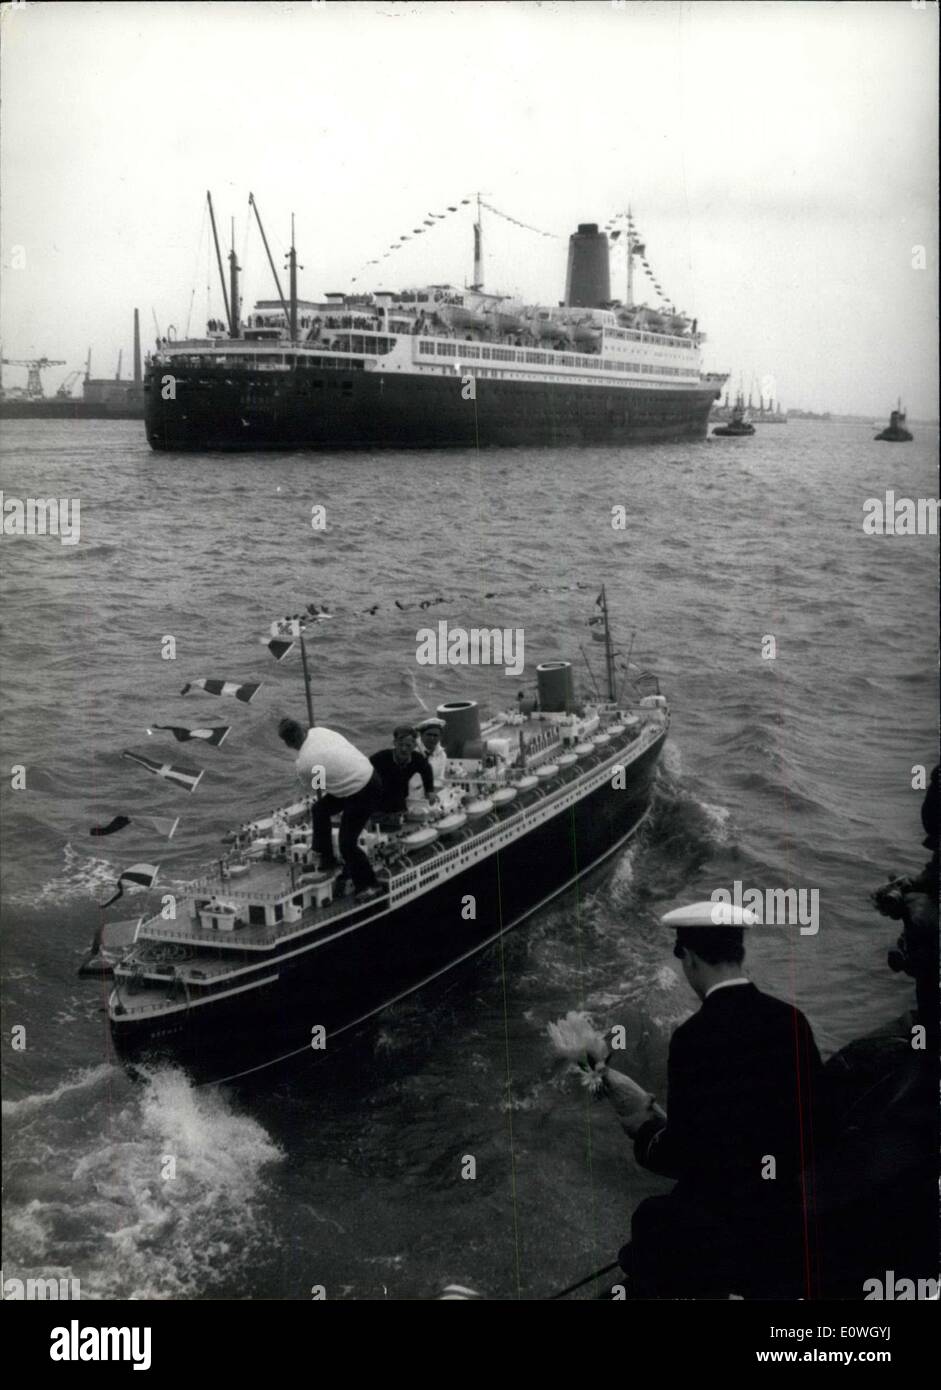 Sep. 24, 1962 - Two ships named ''Bremen''. Met on the Weser, today. The 'little Bremen', a and the 'big Bremen' which-coming from New York in Bremerhaven. Ops: the biggest original ship-model able to swim constructed by Gunter Bos and Gunter Buse from Osnabruck within ten years. Both are neither experts nor craftsmen. Here the 'little Bremen' is putting to sea to welcome the big sister at the arrival in Bremerhaven. Stock Photo